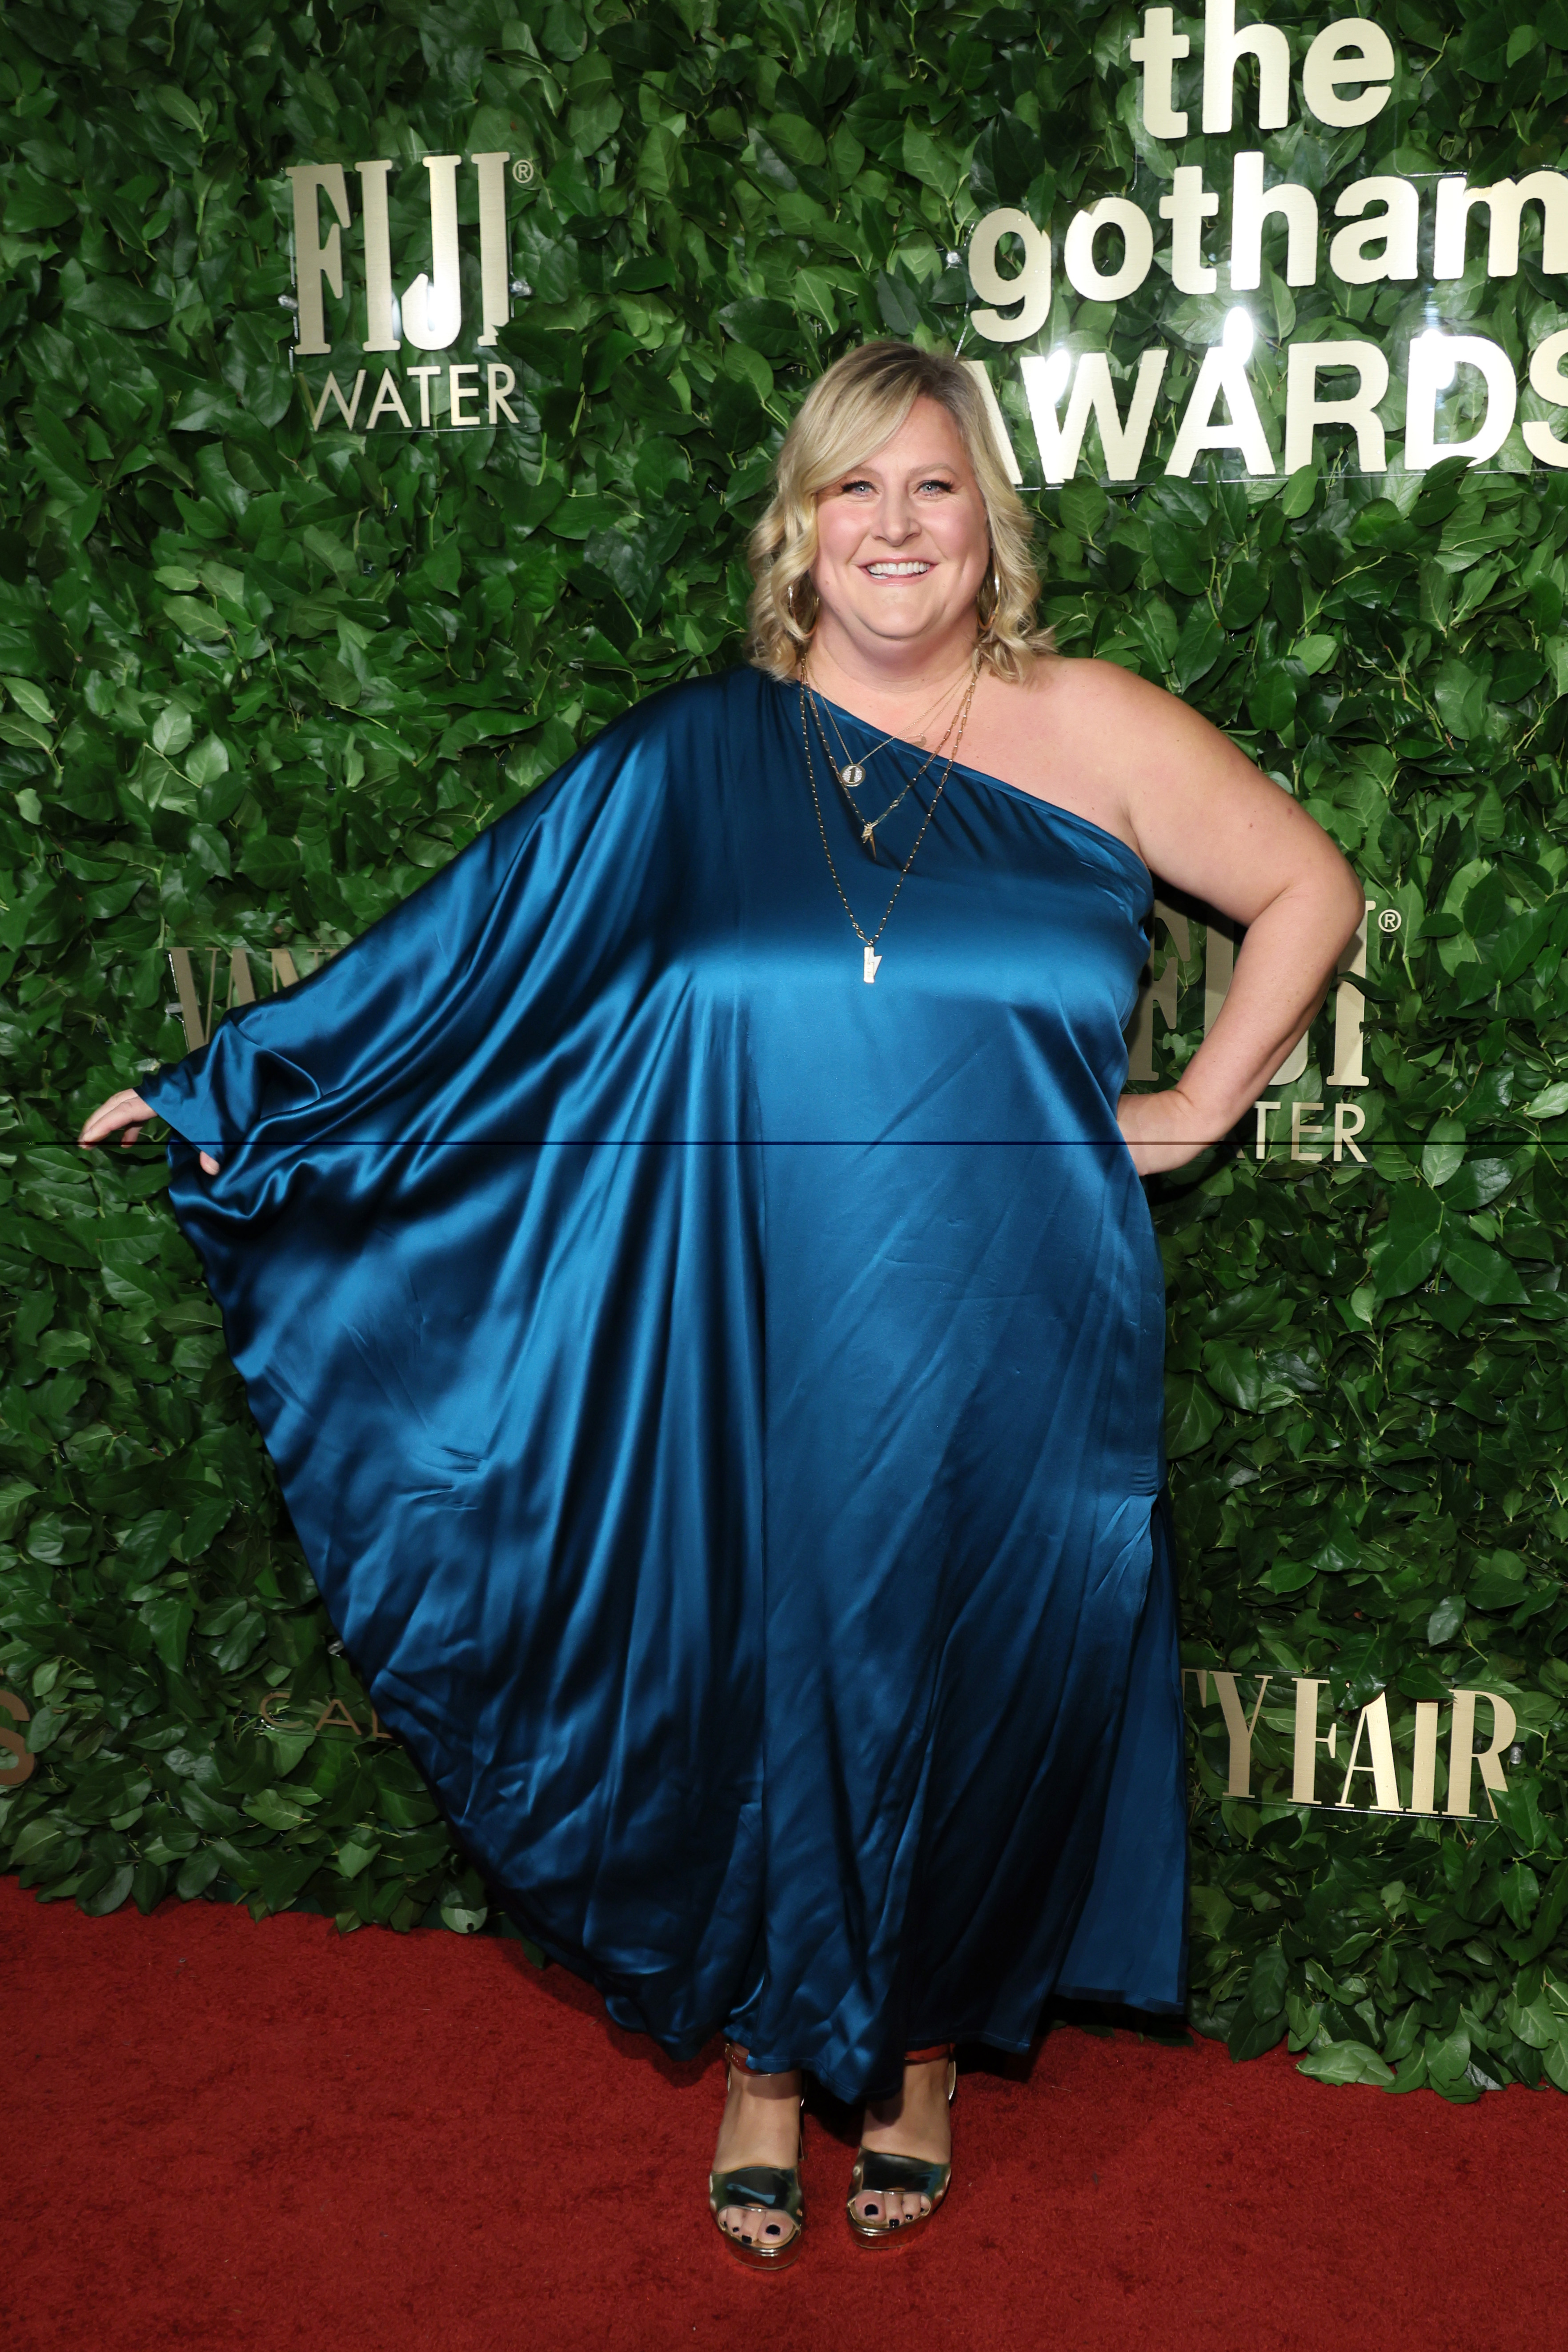 Bridget Everett attends The 2022 Gotham Awards at Cipriani Wall Street at Cipriani Wall Street on November 28, 2022 in New York City. | Source: Getty Images